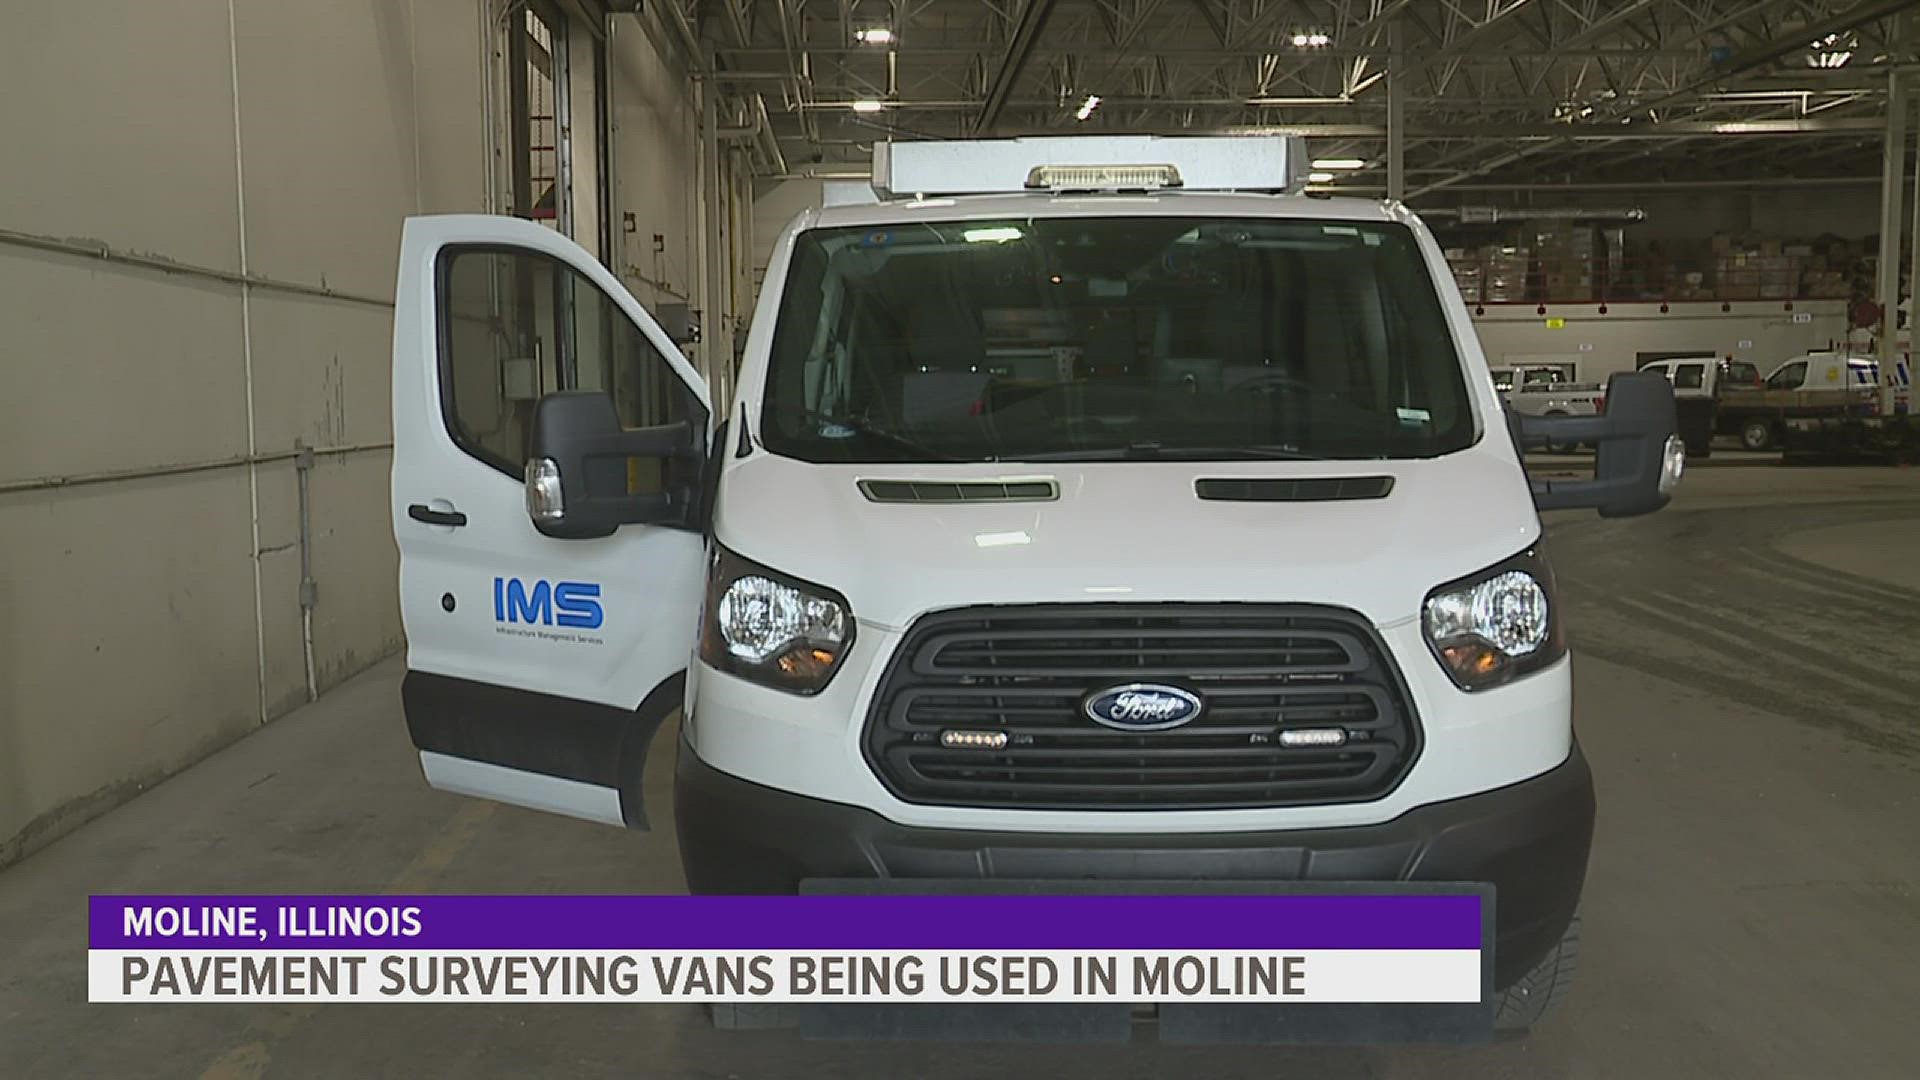 Pavement surveying vans will be driving slowly through Moline's streets and alleys over the next few weeks to help future infrastructure spending decisions.